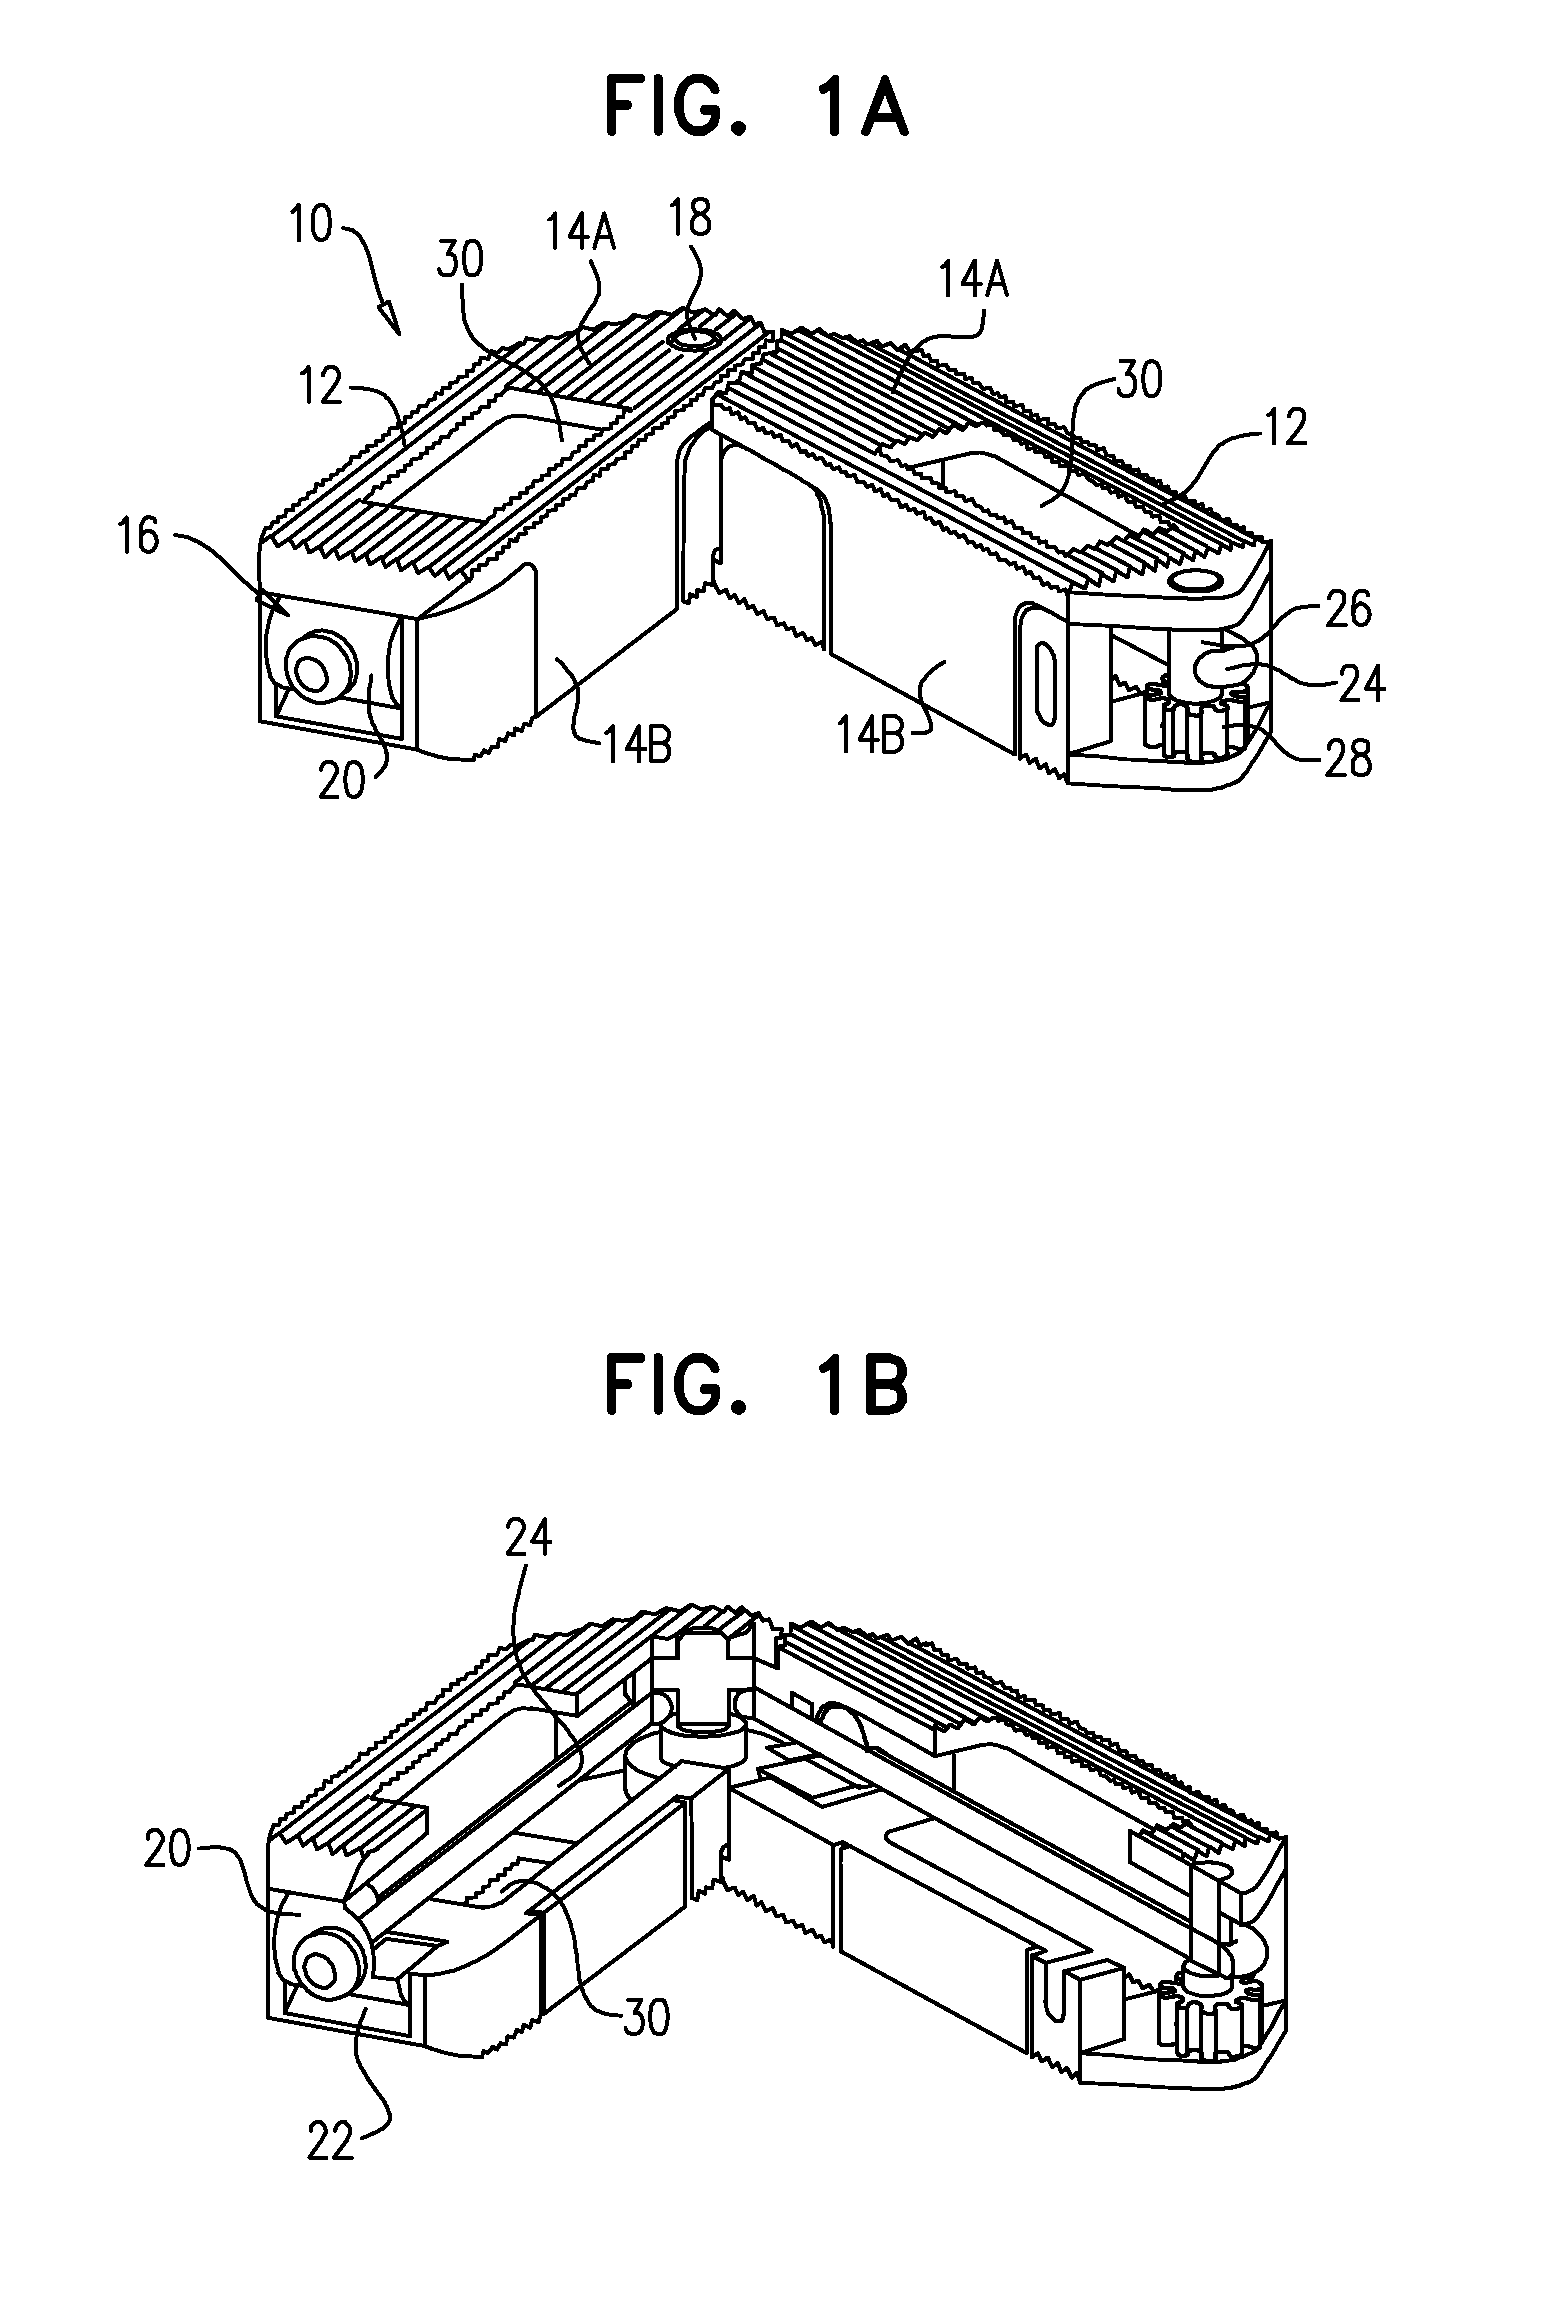 Orthopedic expandable devices